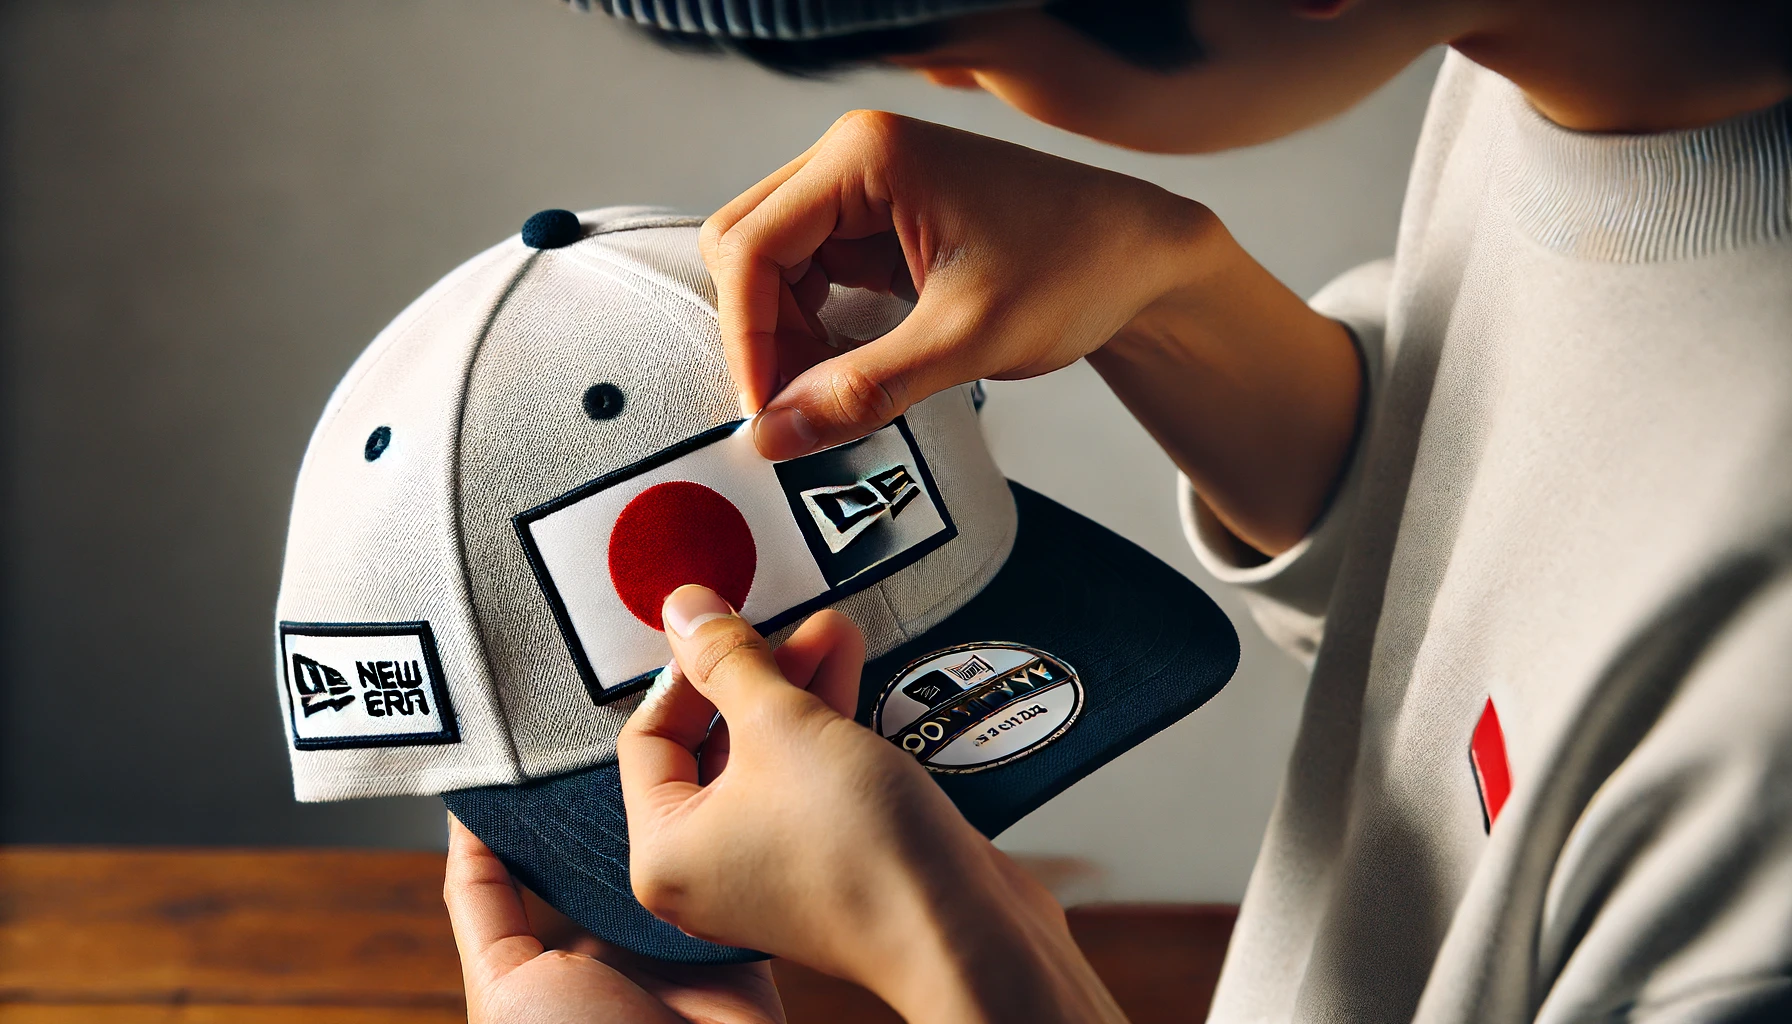 A Japanese person reapplying the sticker to a New Era cap. The person is carefully placing the sticker back on the cap's brim.